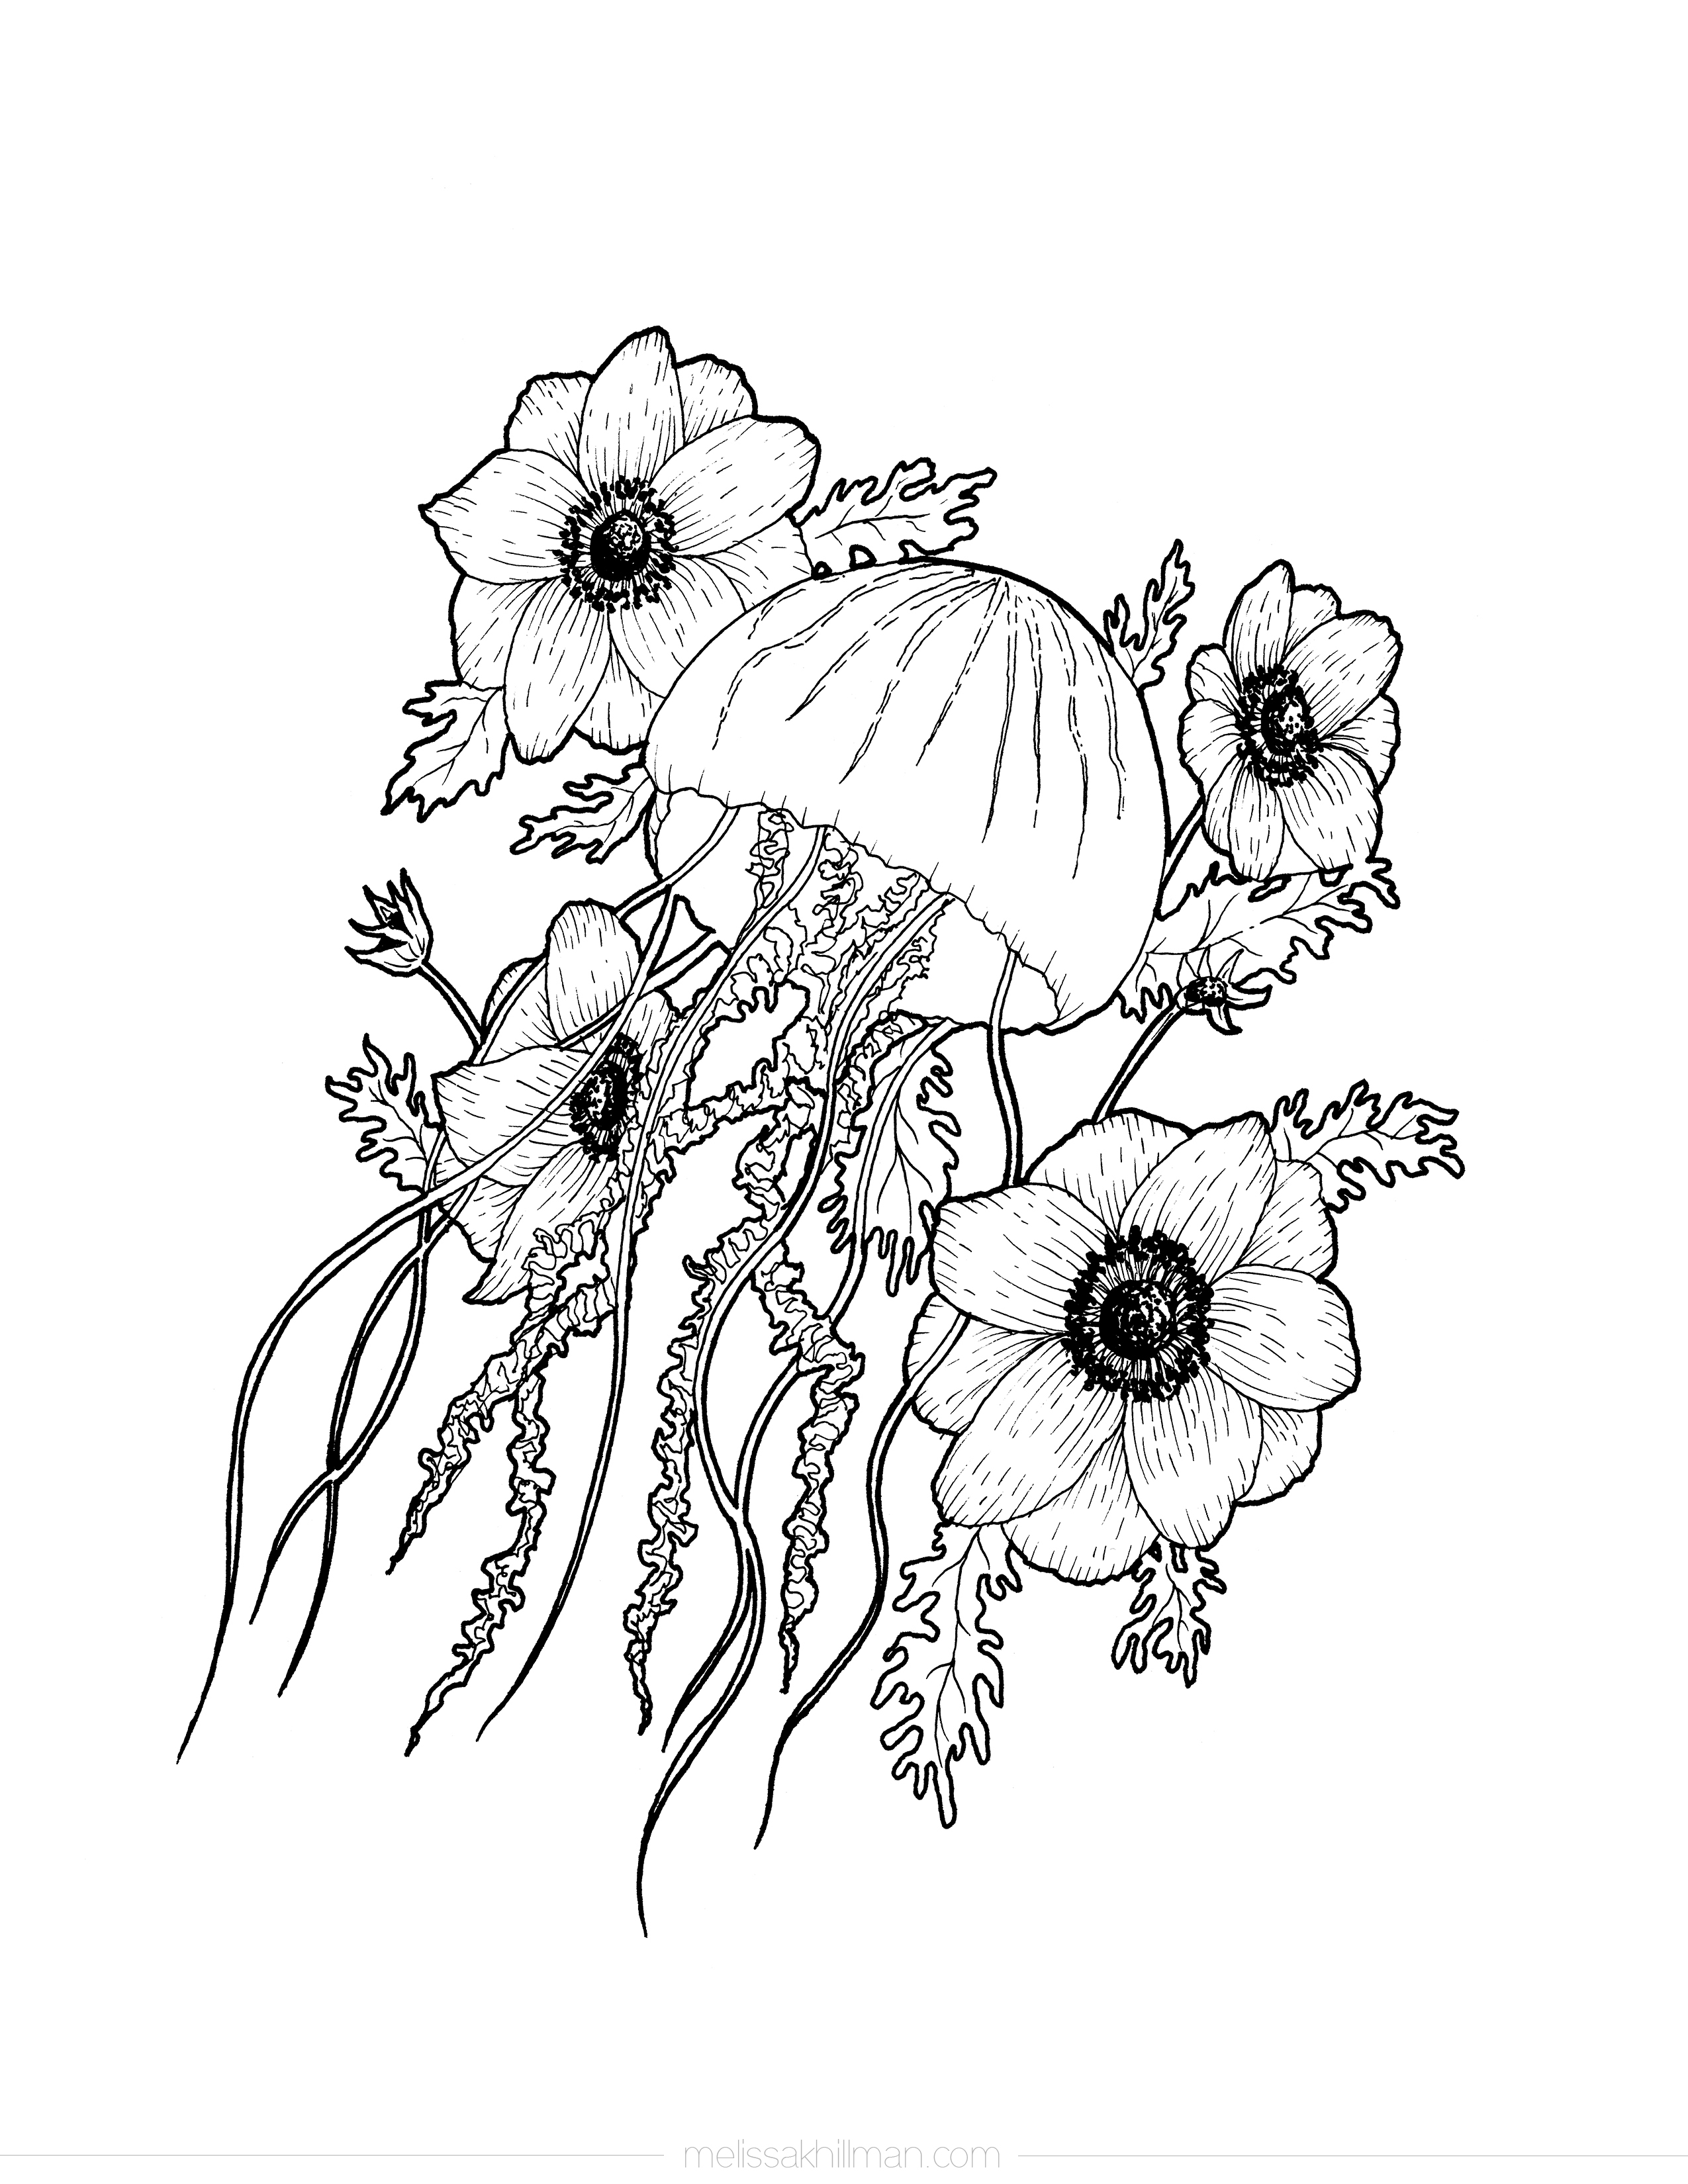 “Jellyfish” Coloring Page